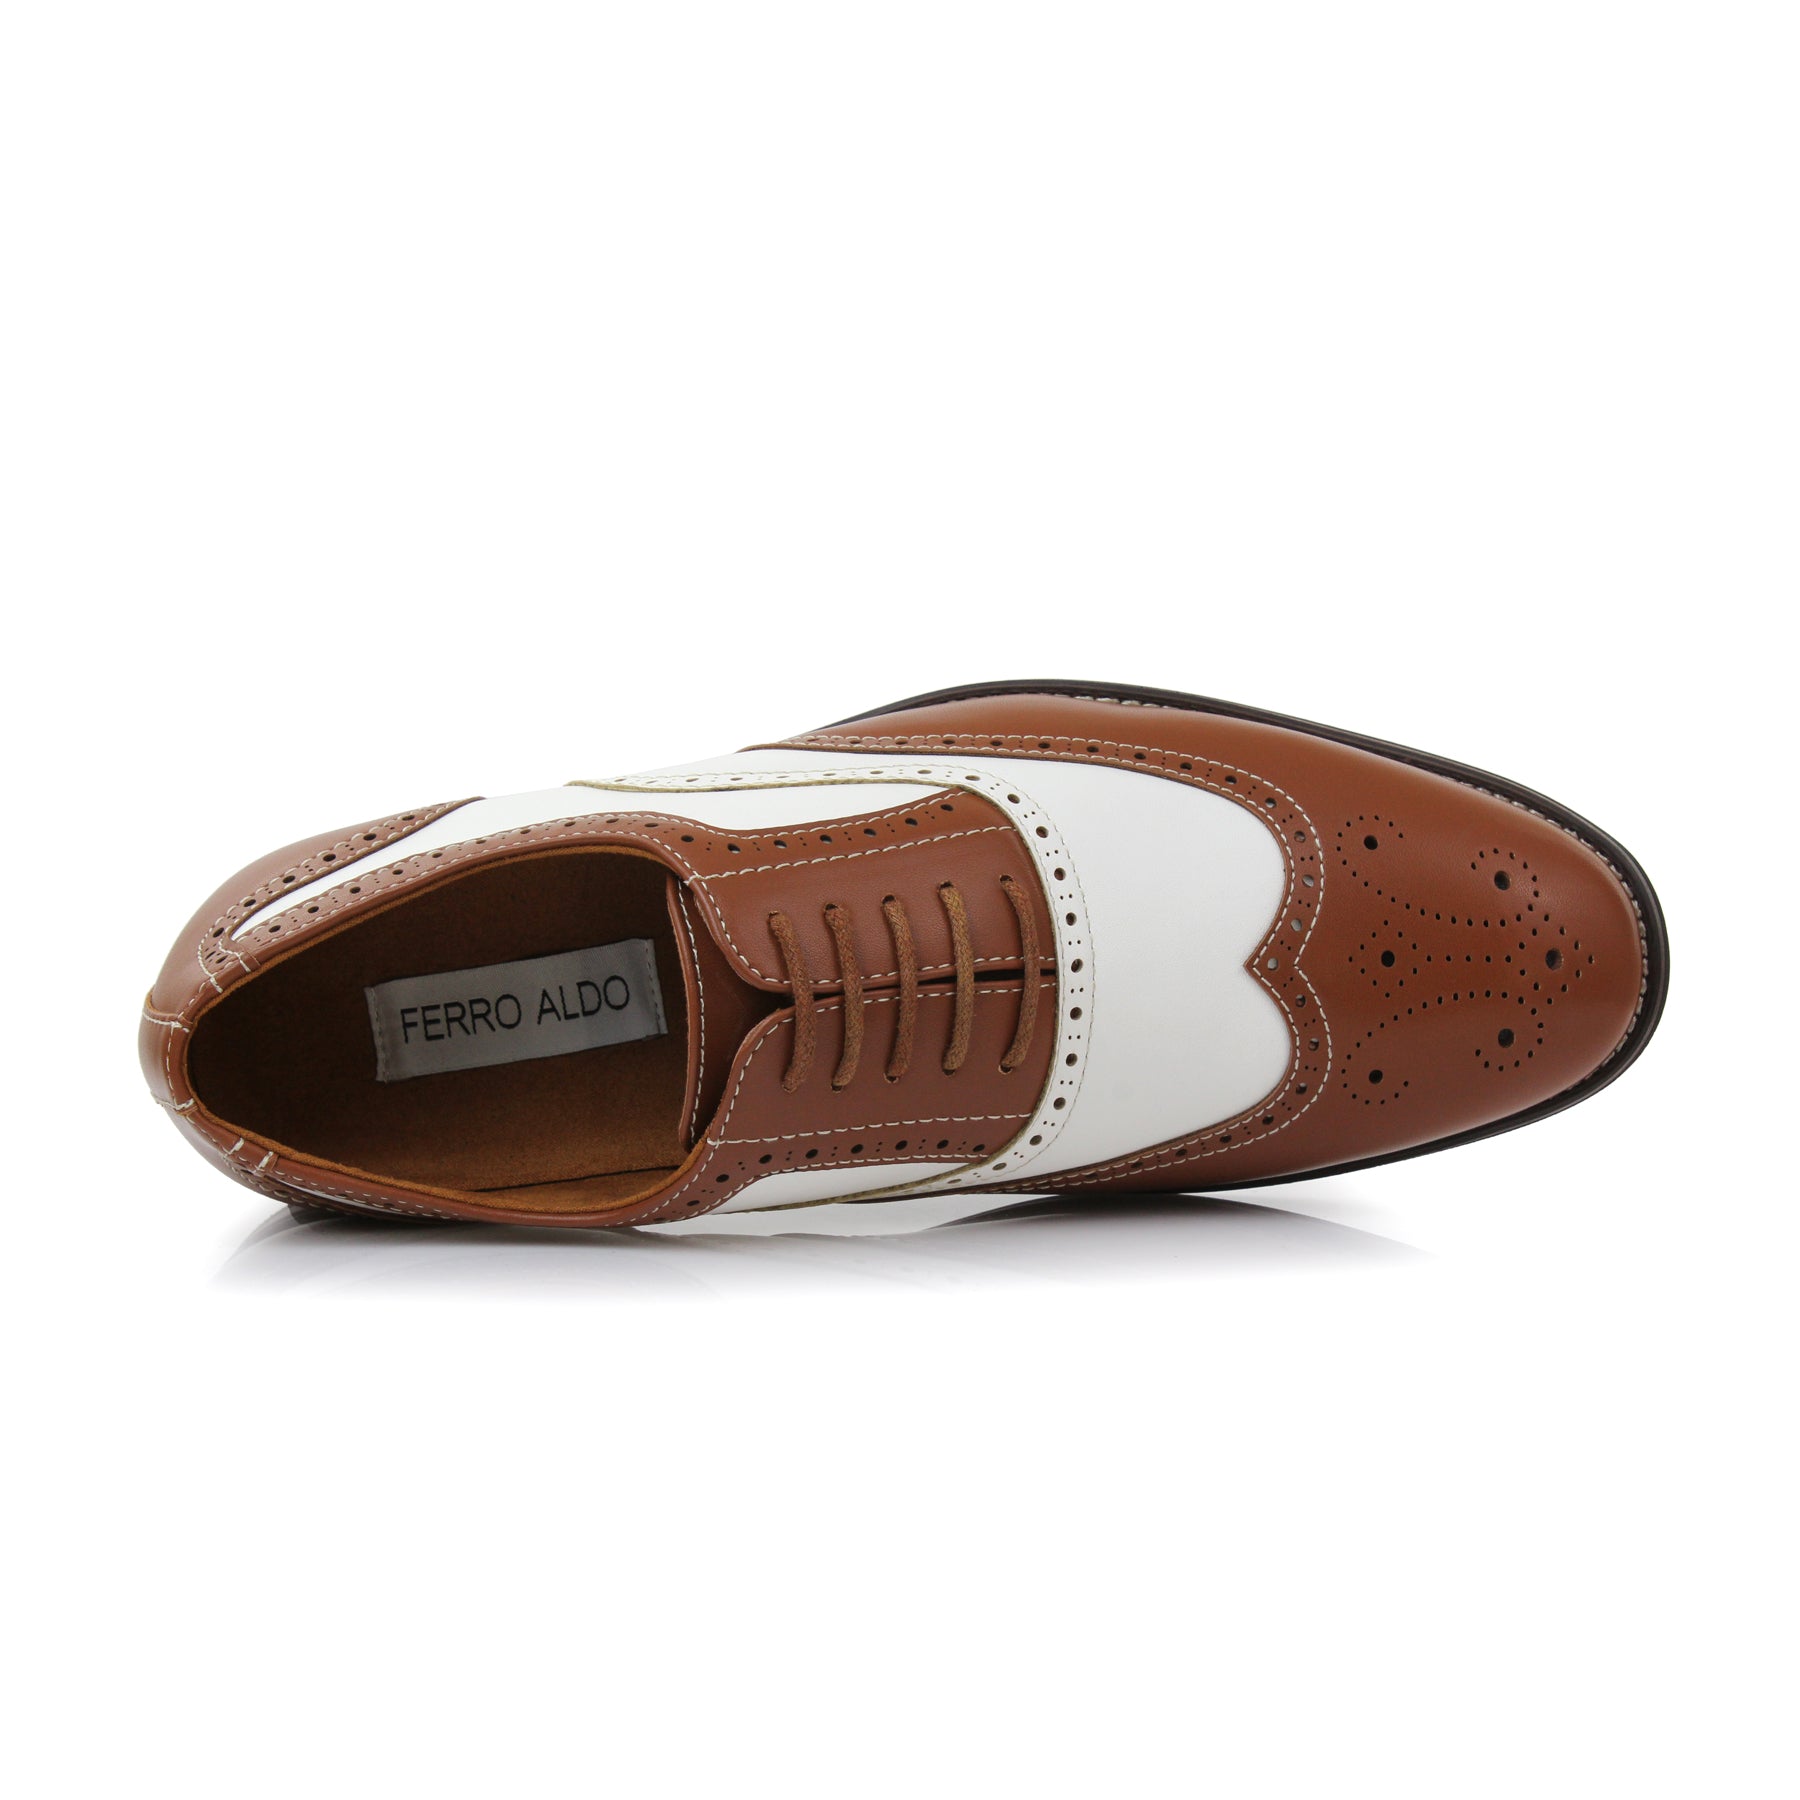 Two-Toned Brogue Wingtip Oxfords | Arthur by Ferro Aldo | Conal Footwear | Top-Down Angle View